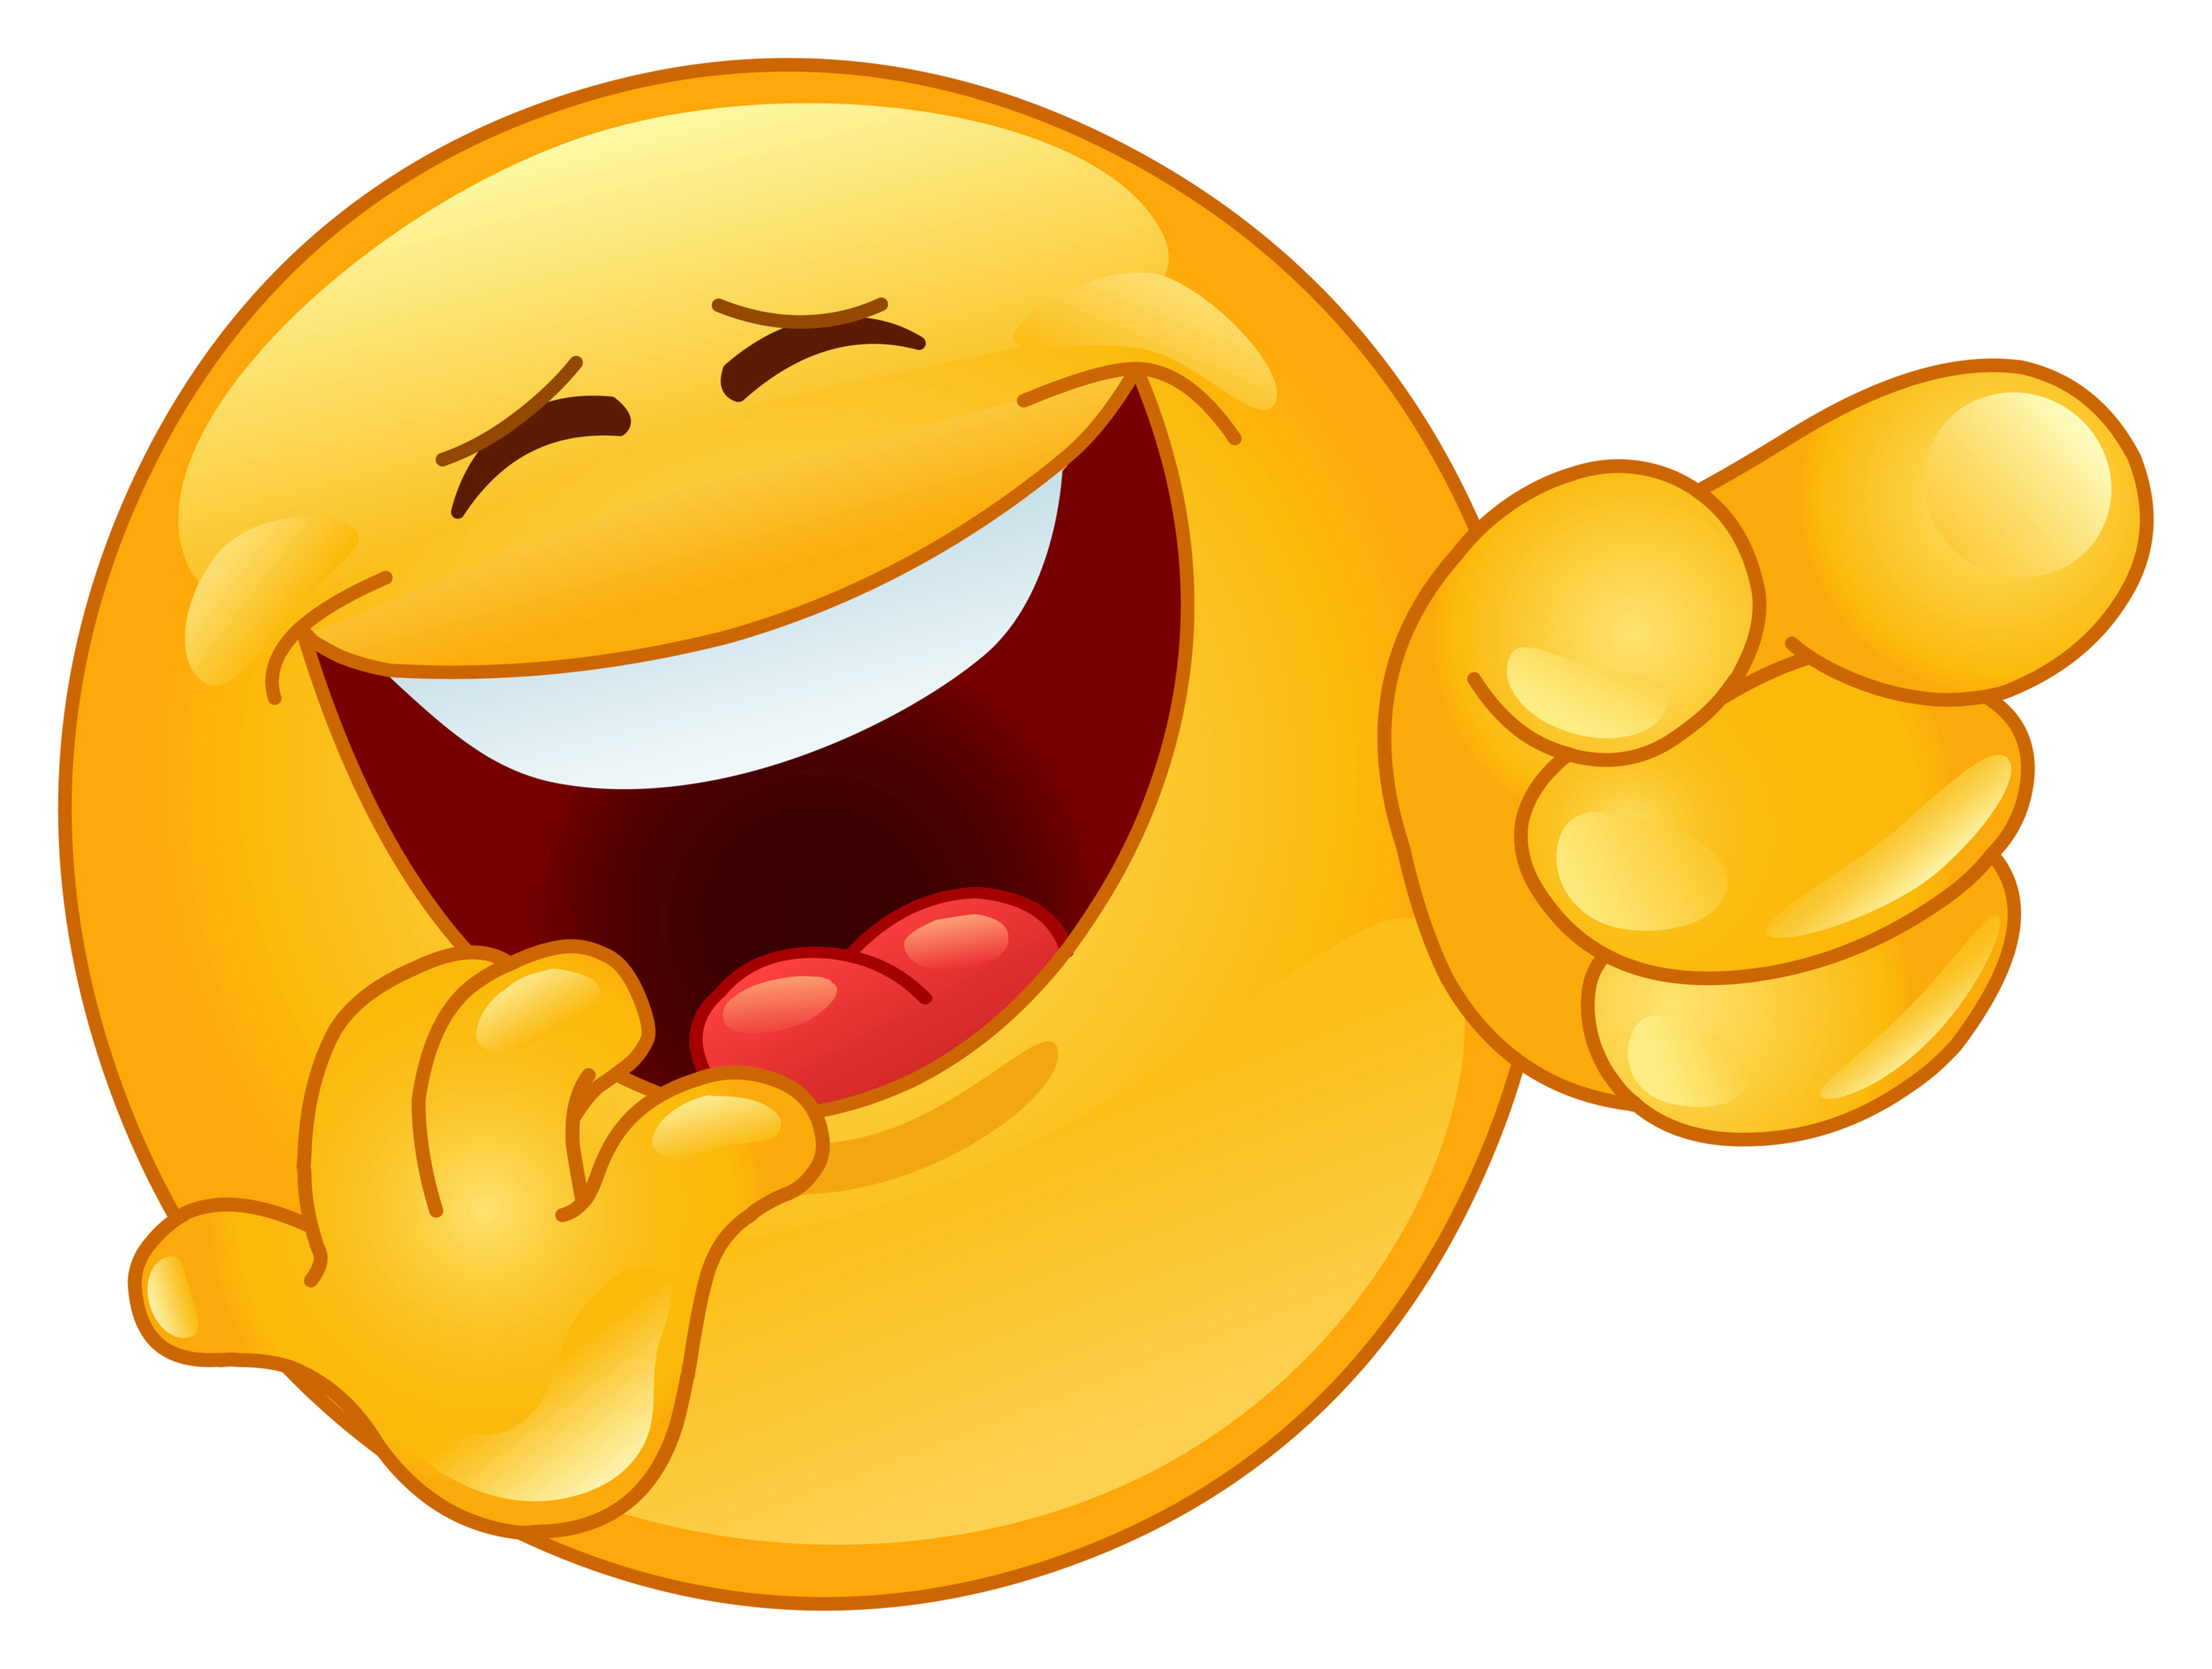 Images For > Emoticon Laughing Hysterically Clipart - Free to use ...